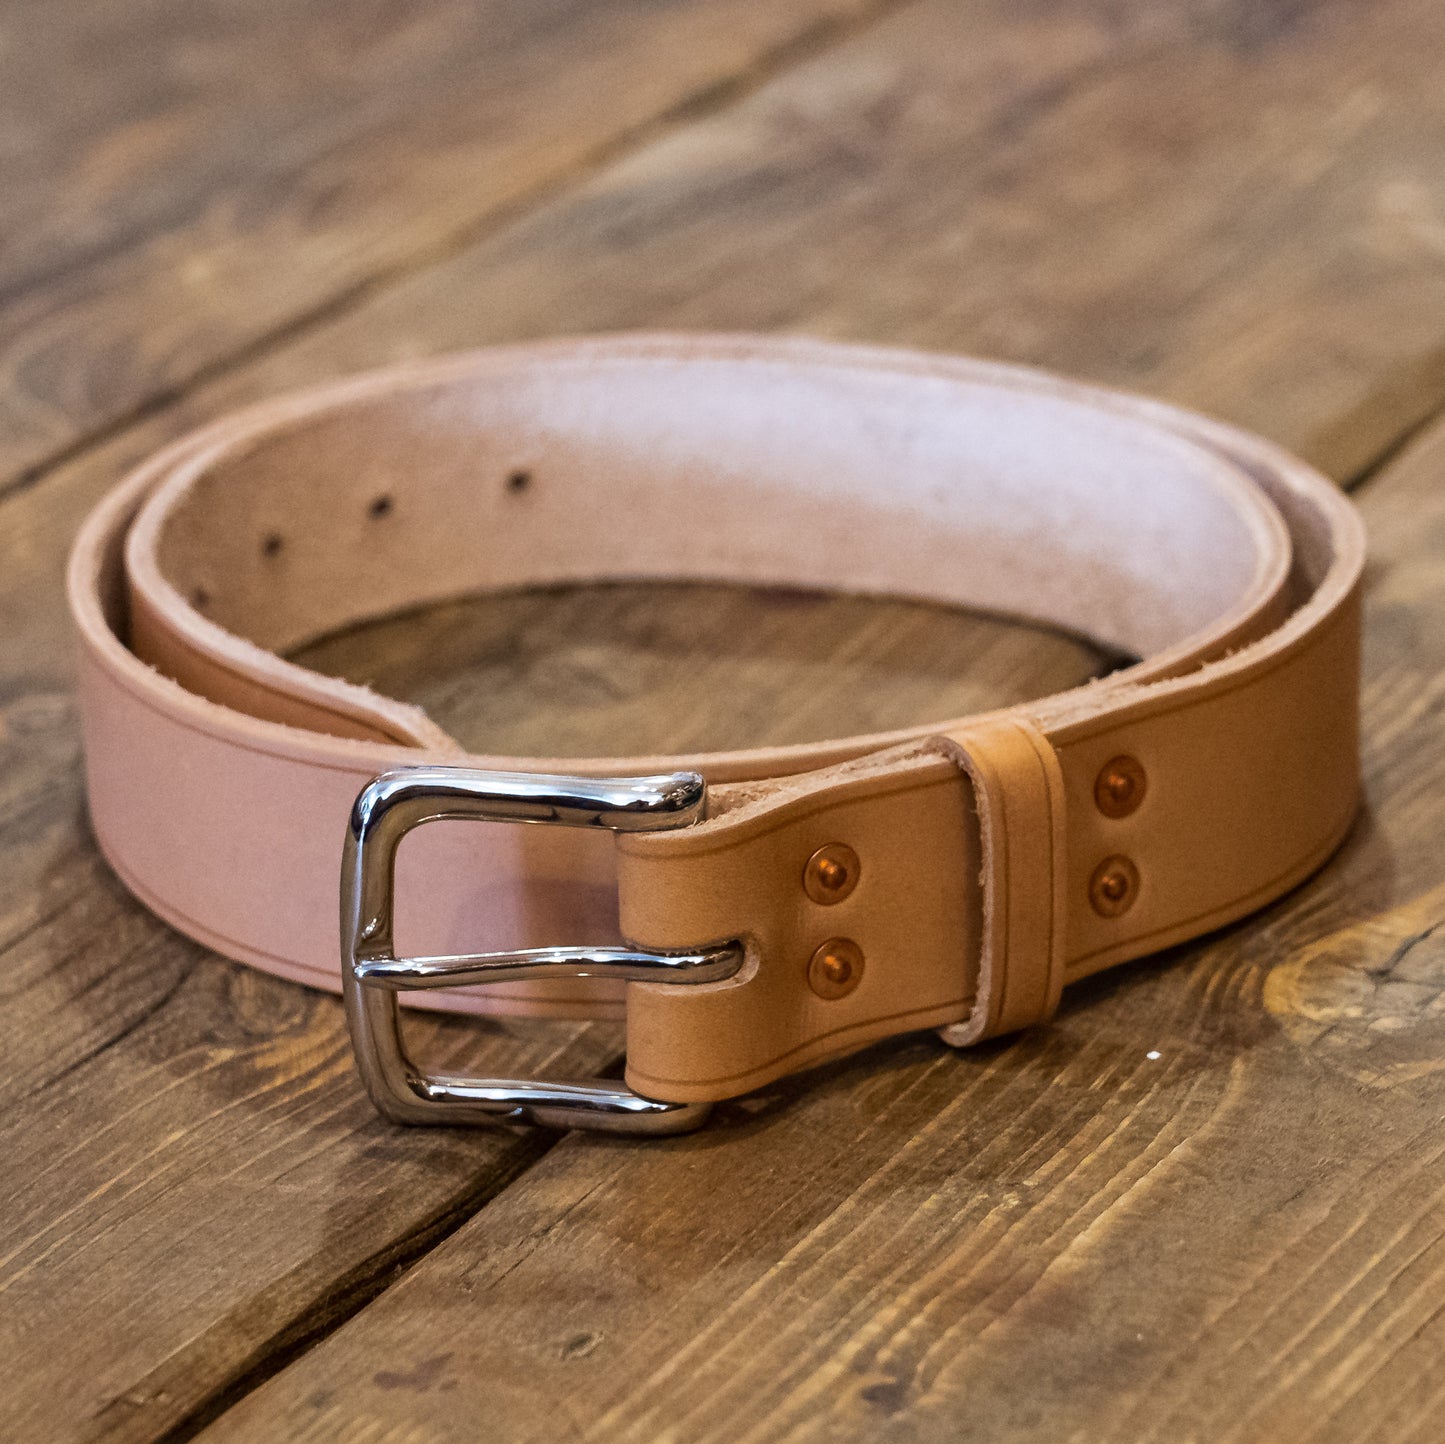 vegitable tanned leather belt with riveted nickel buckle